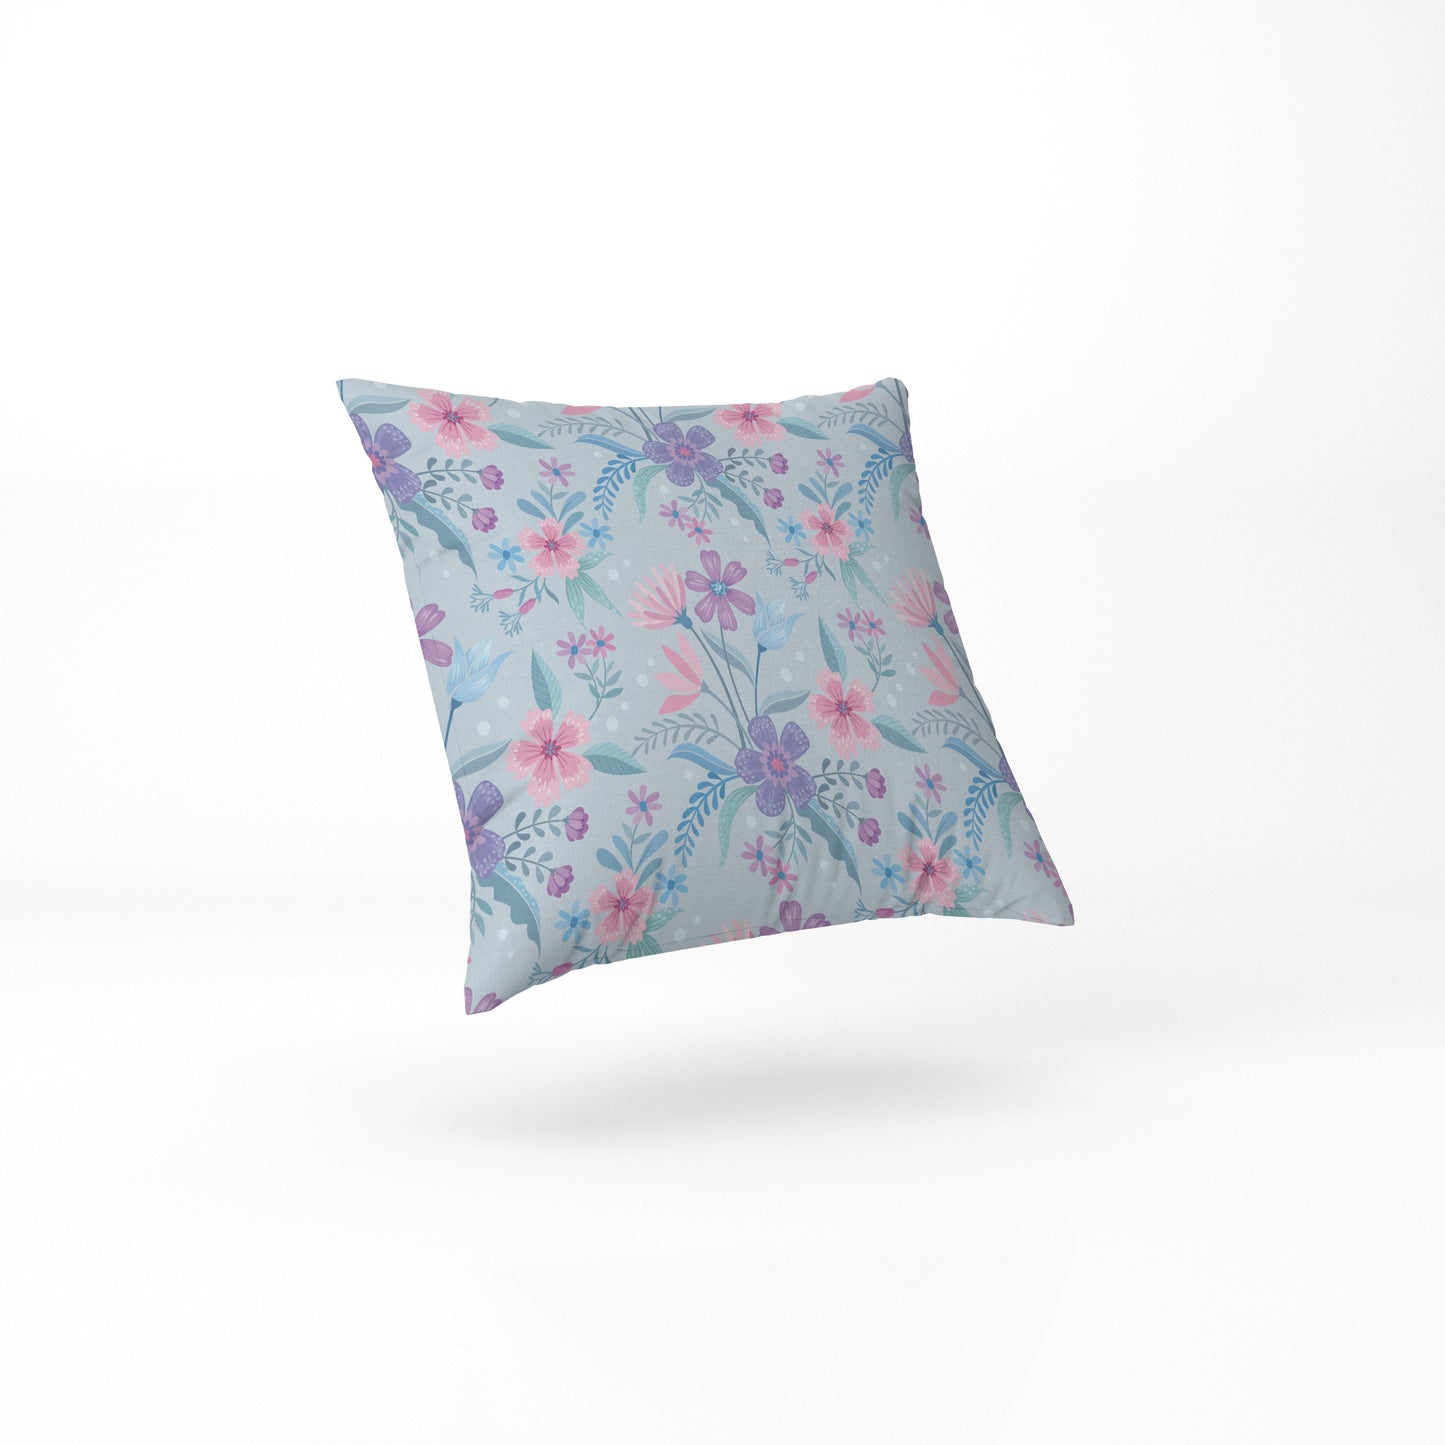 custom Blue Floral Pillow full sublimation printed in pastel colour